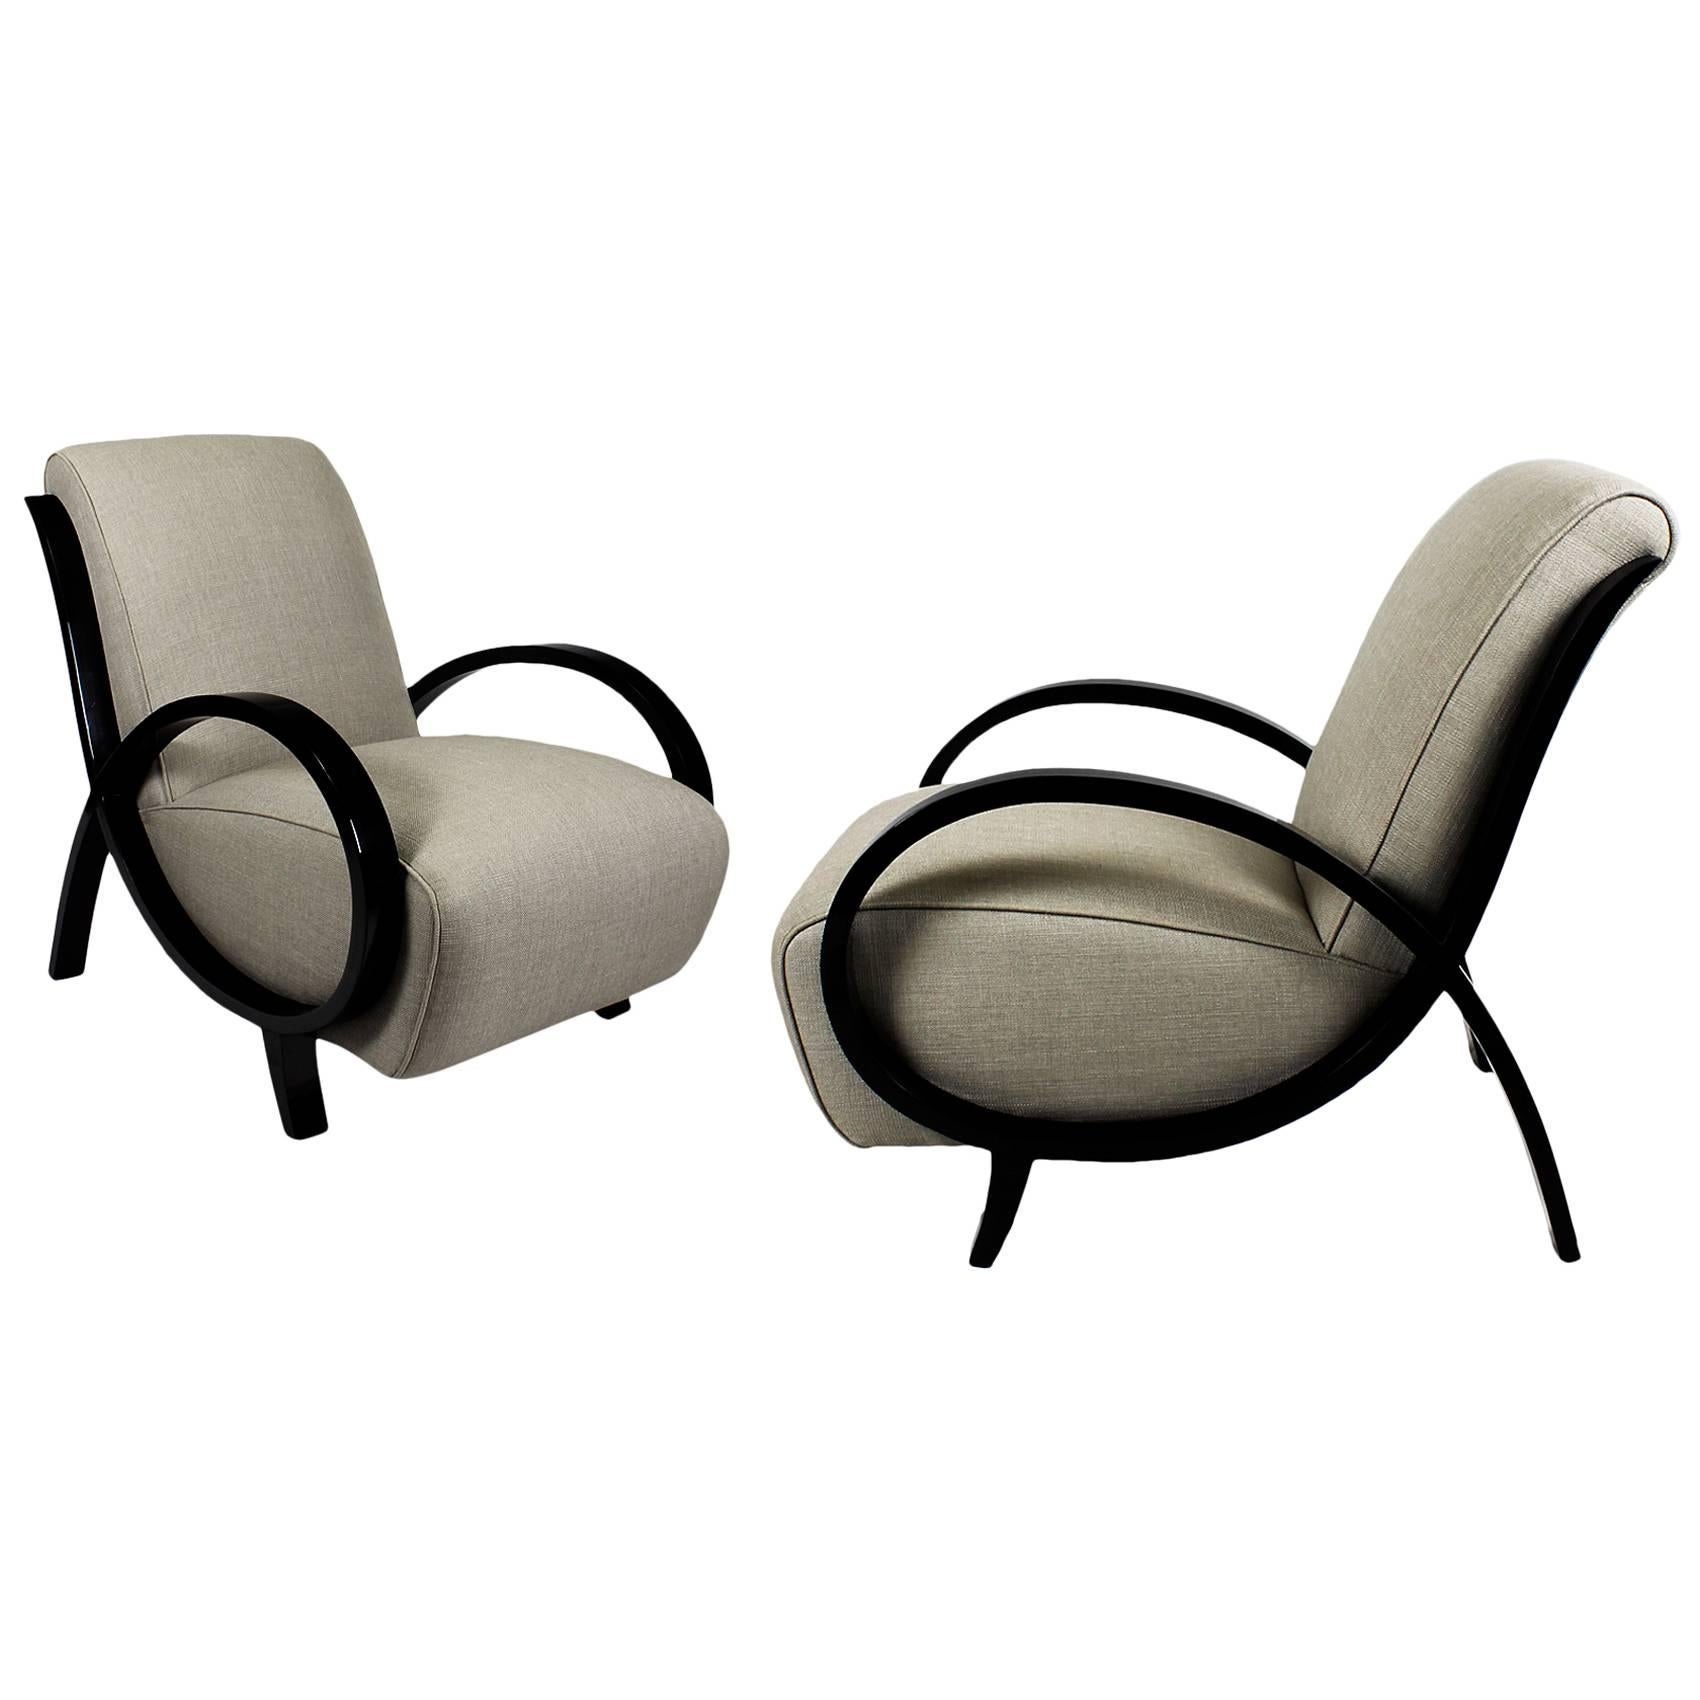 Pair of Art Deco Rounded Armchairs